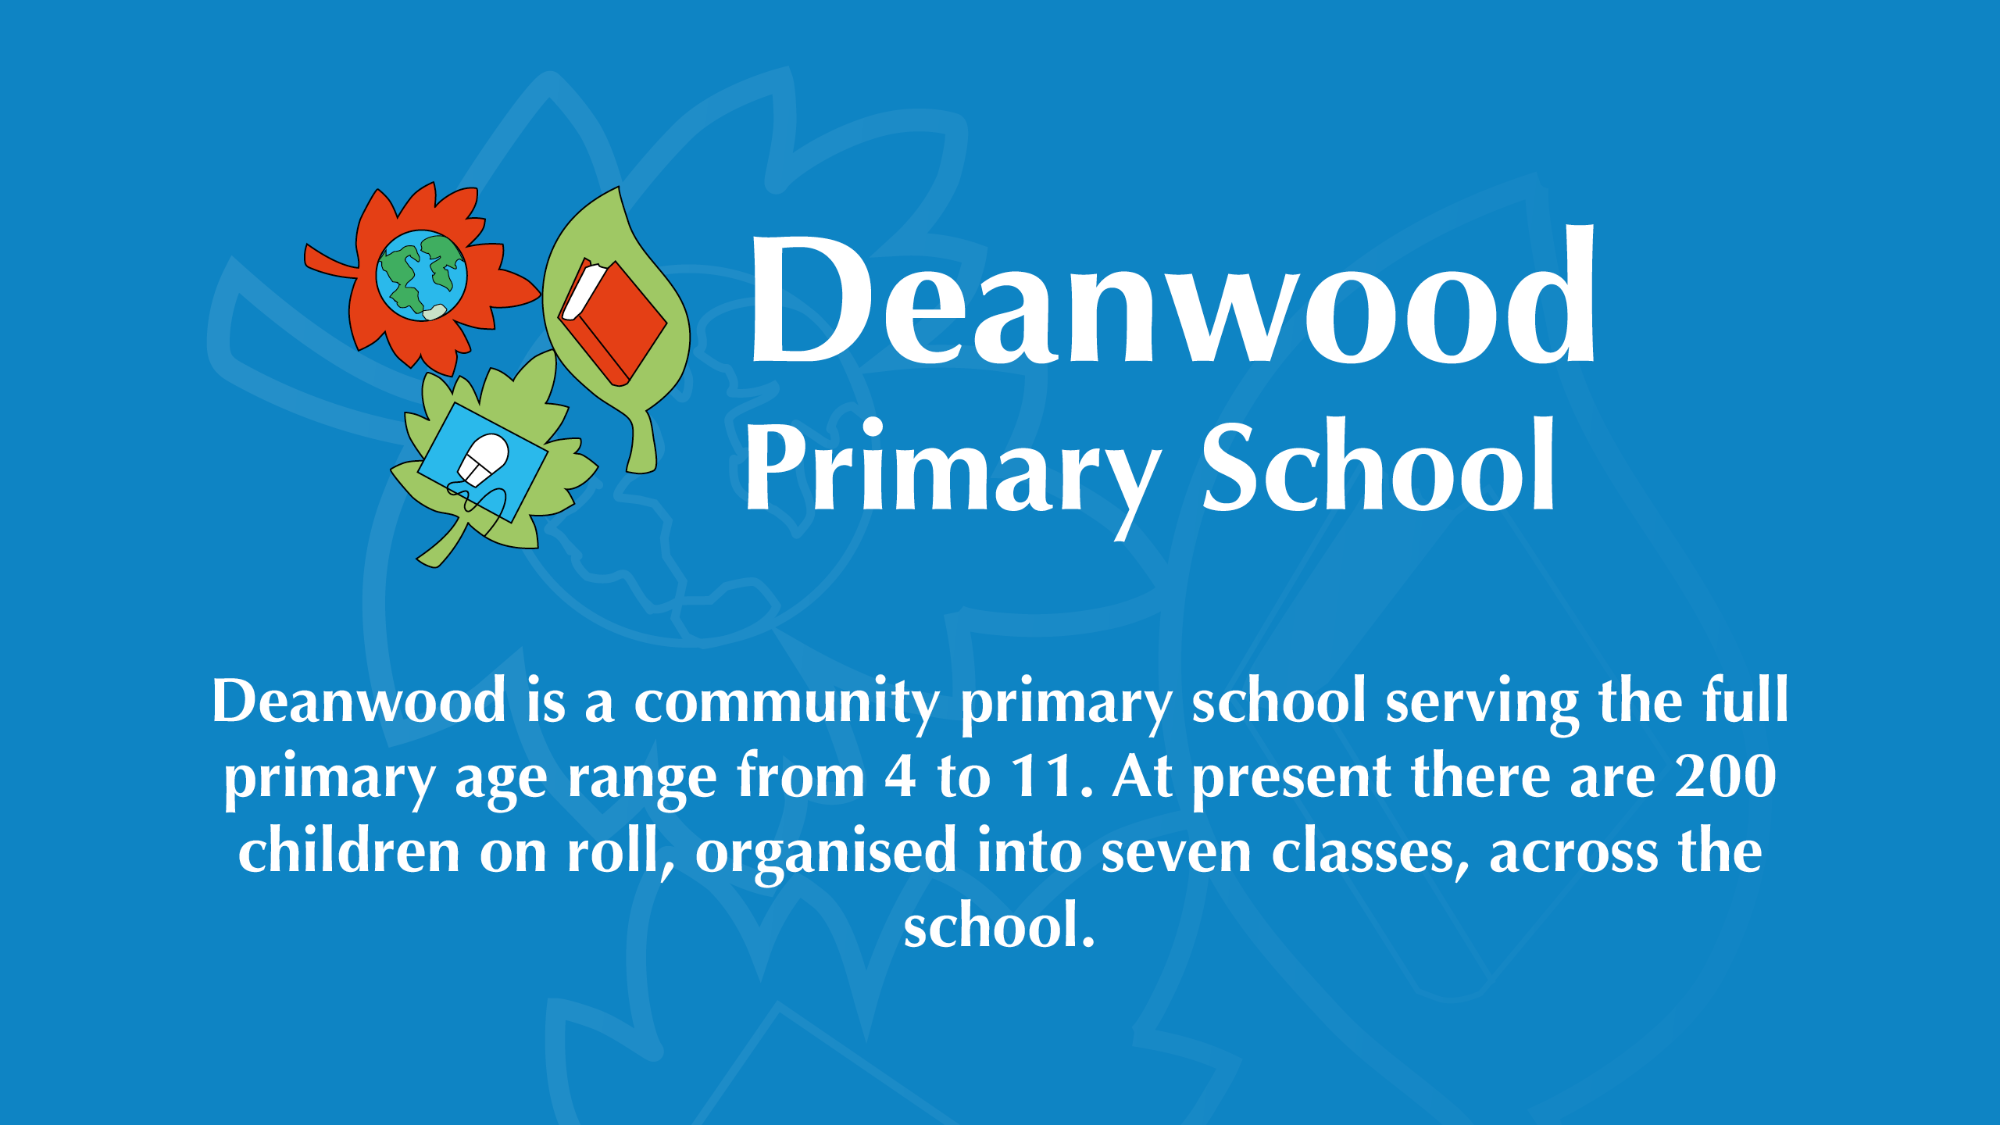 Deanwood Primary School logo on a blue background.